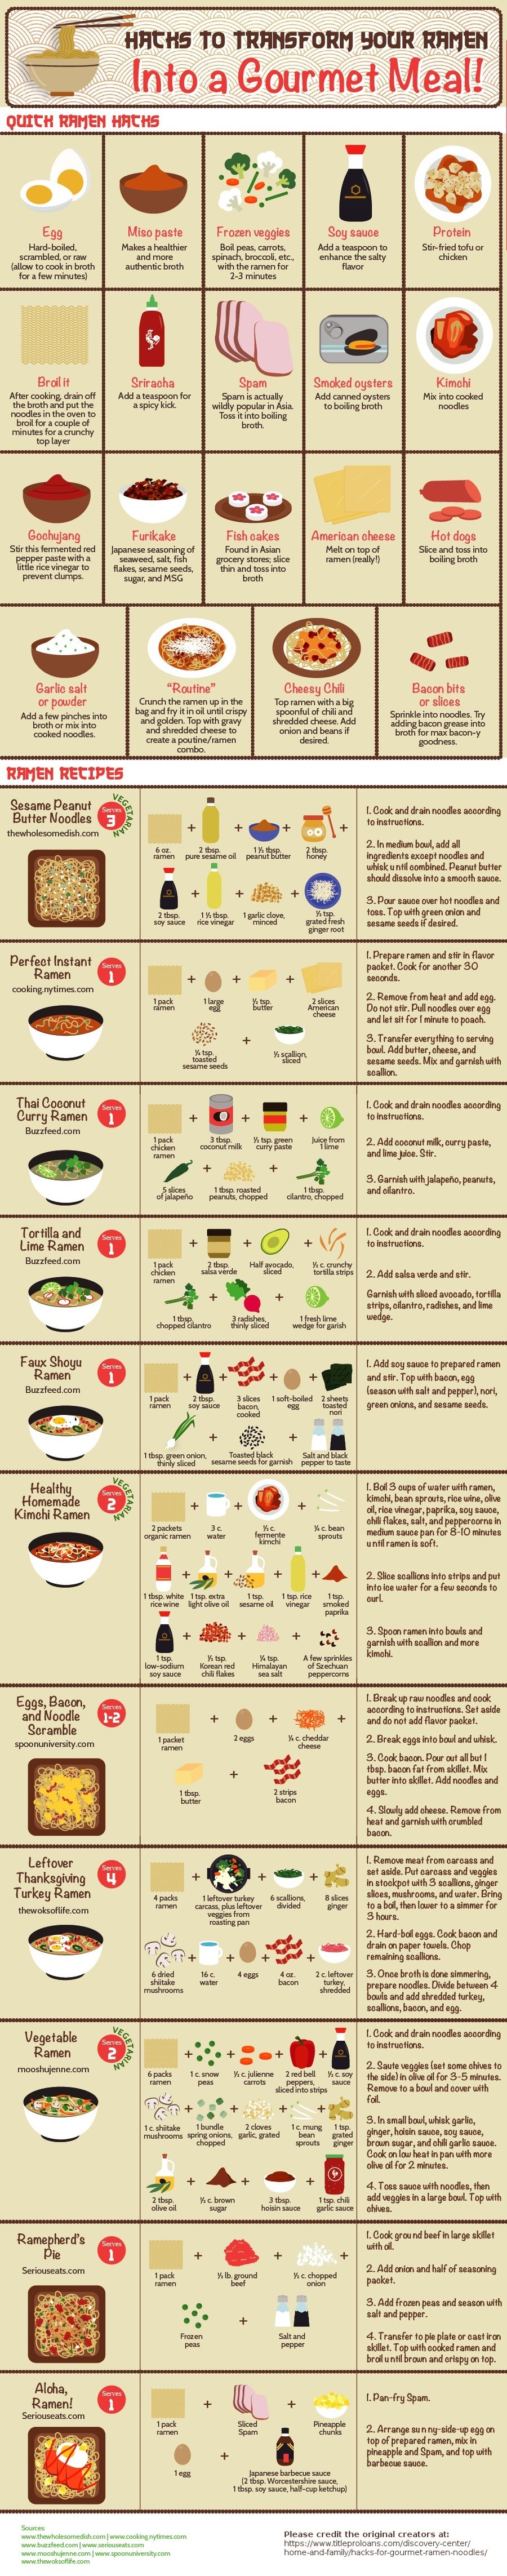 Hacks to turn your Ramen into a gourmet meal. .. I miss eating instant ramen. I can't eat it anymore. Too much sodium, and I've got the high blood pressure.